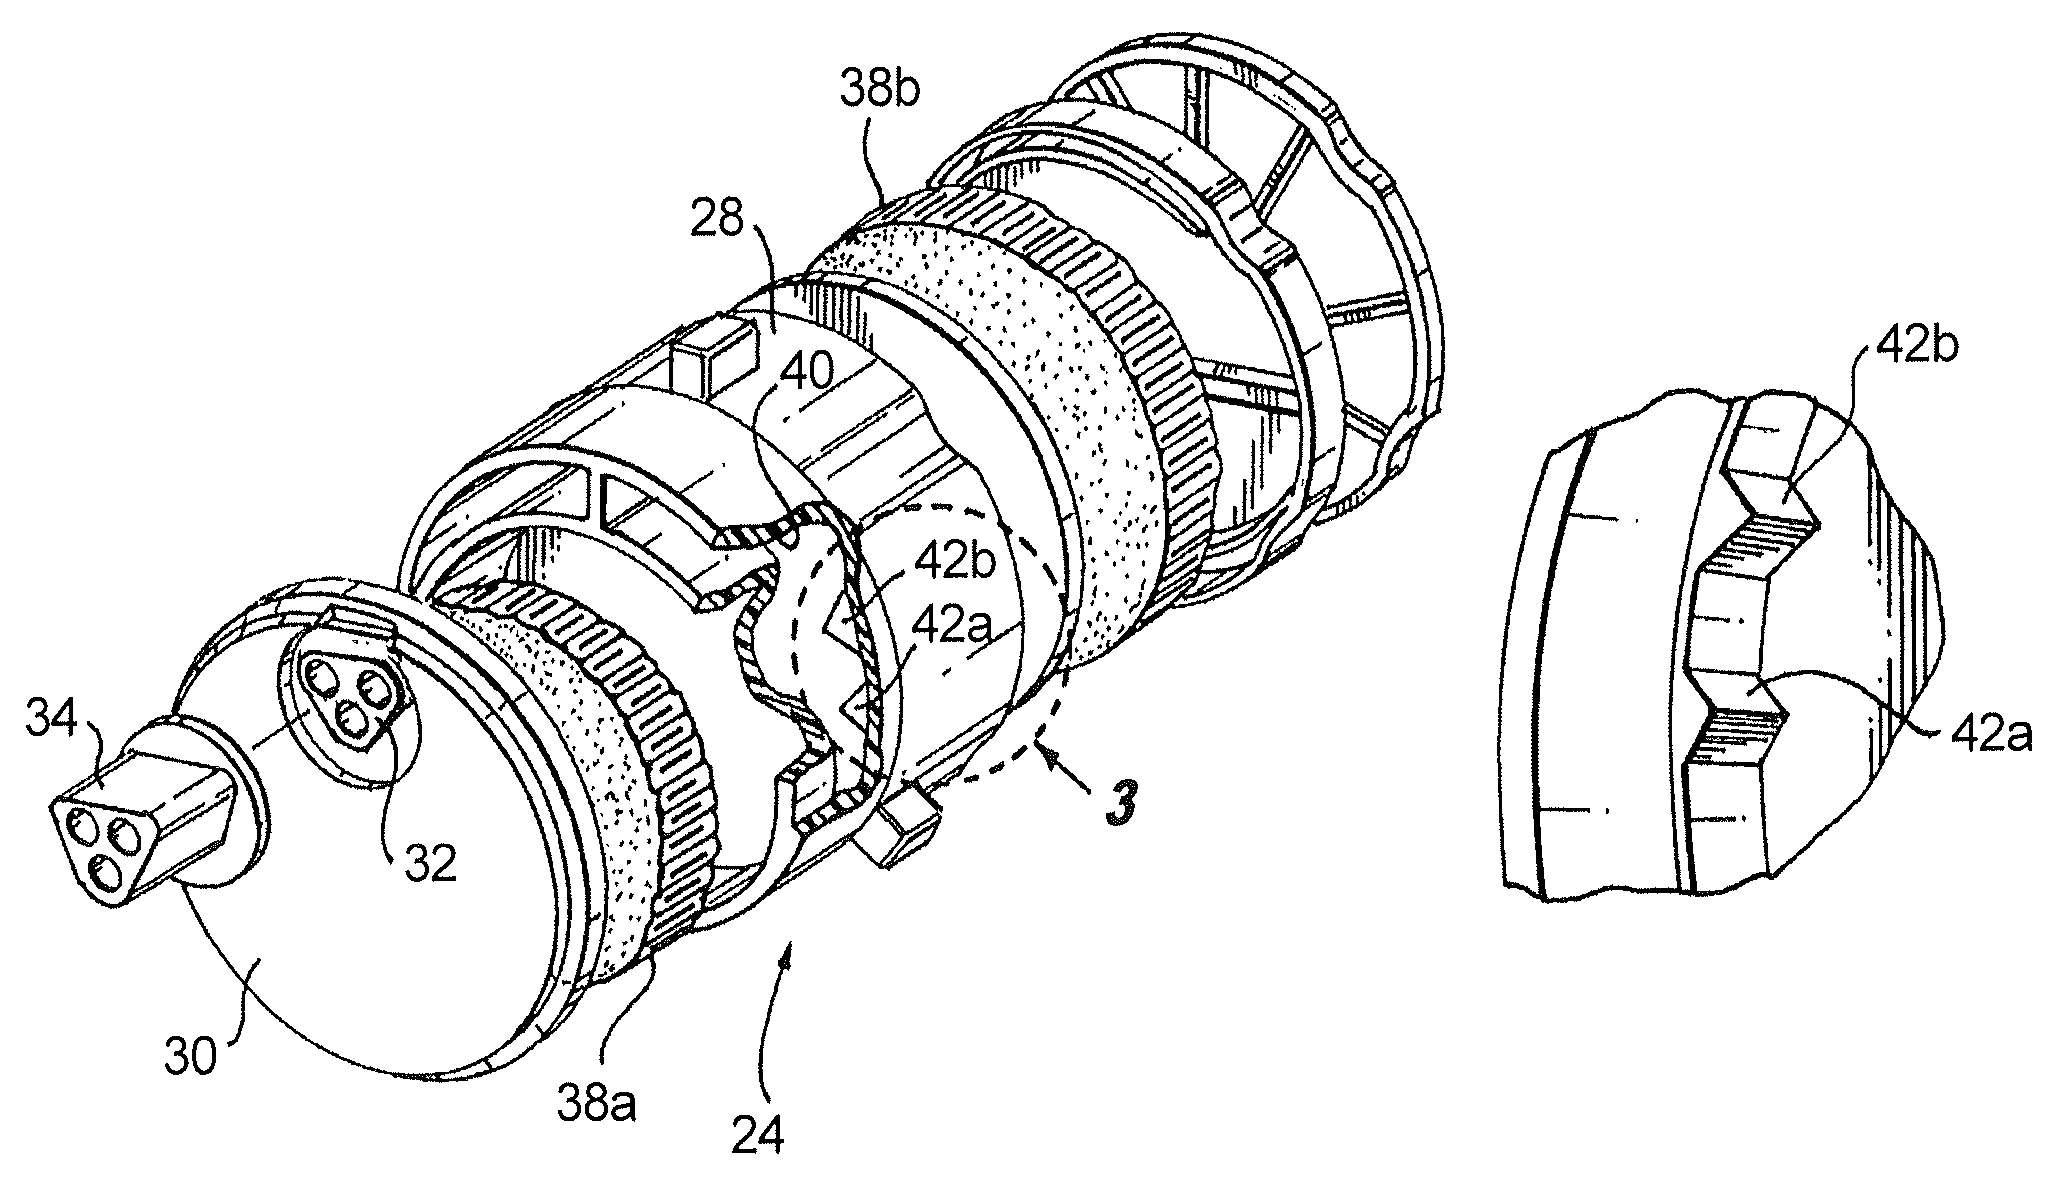 Filter interface for multimodal surgical gas delivery system